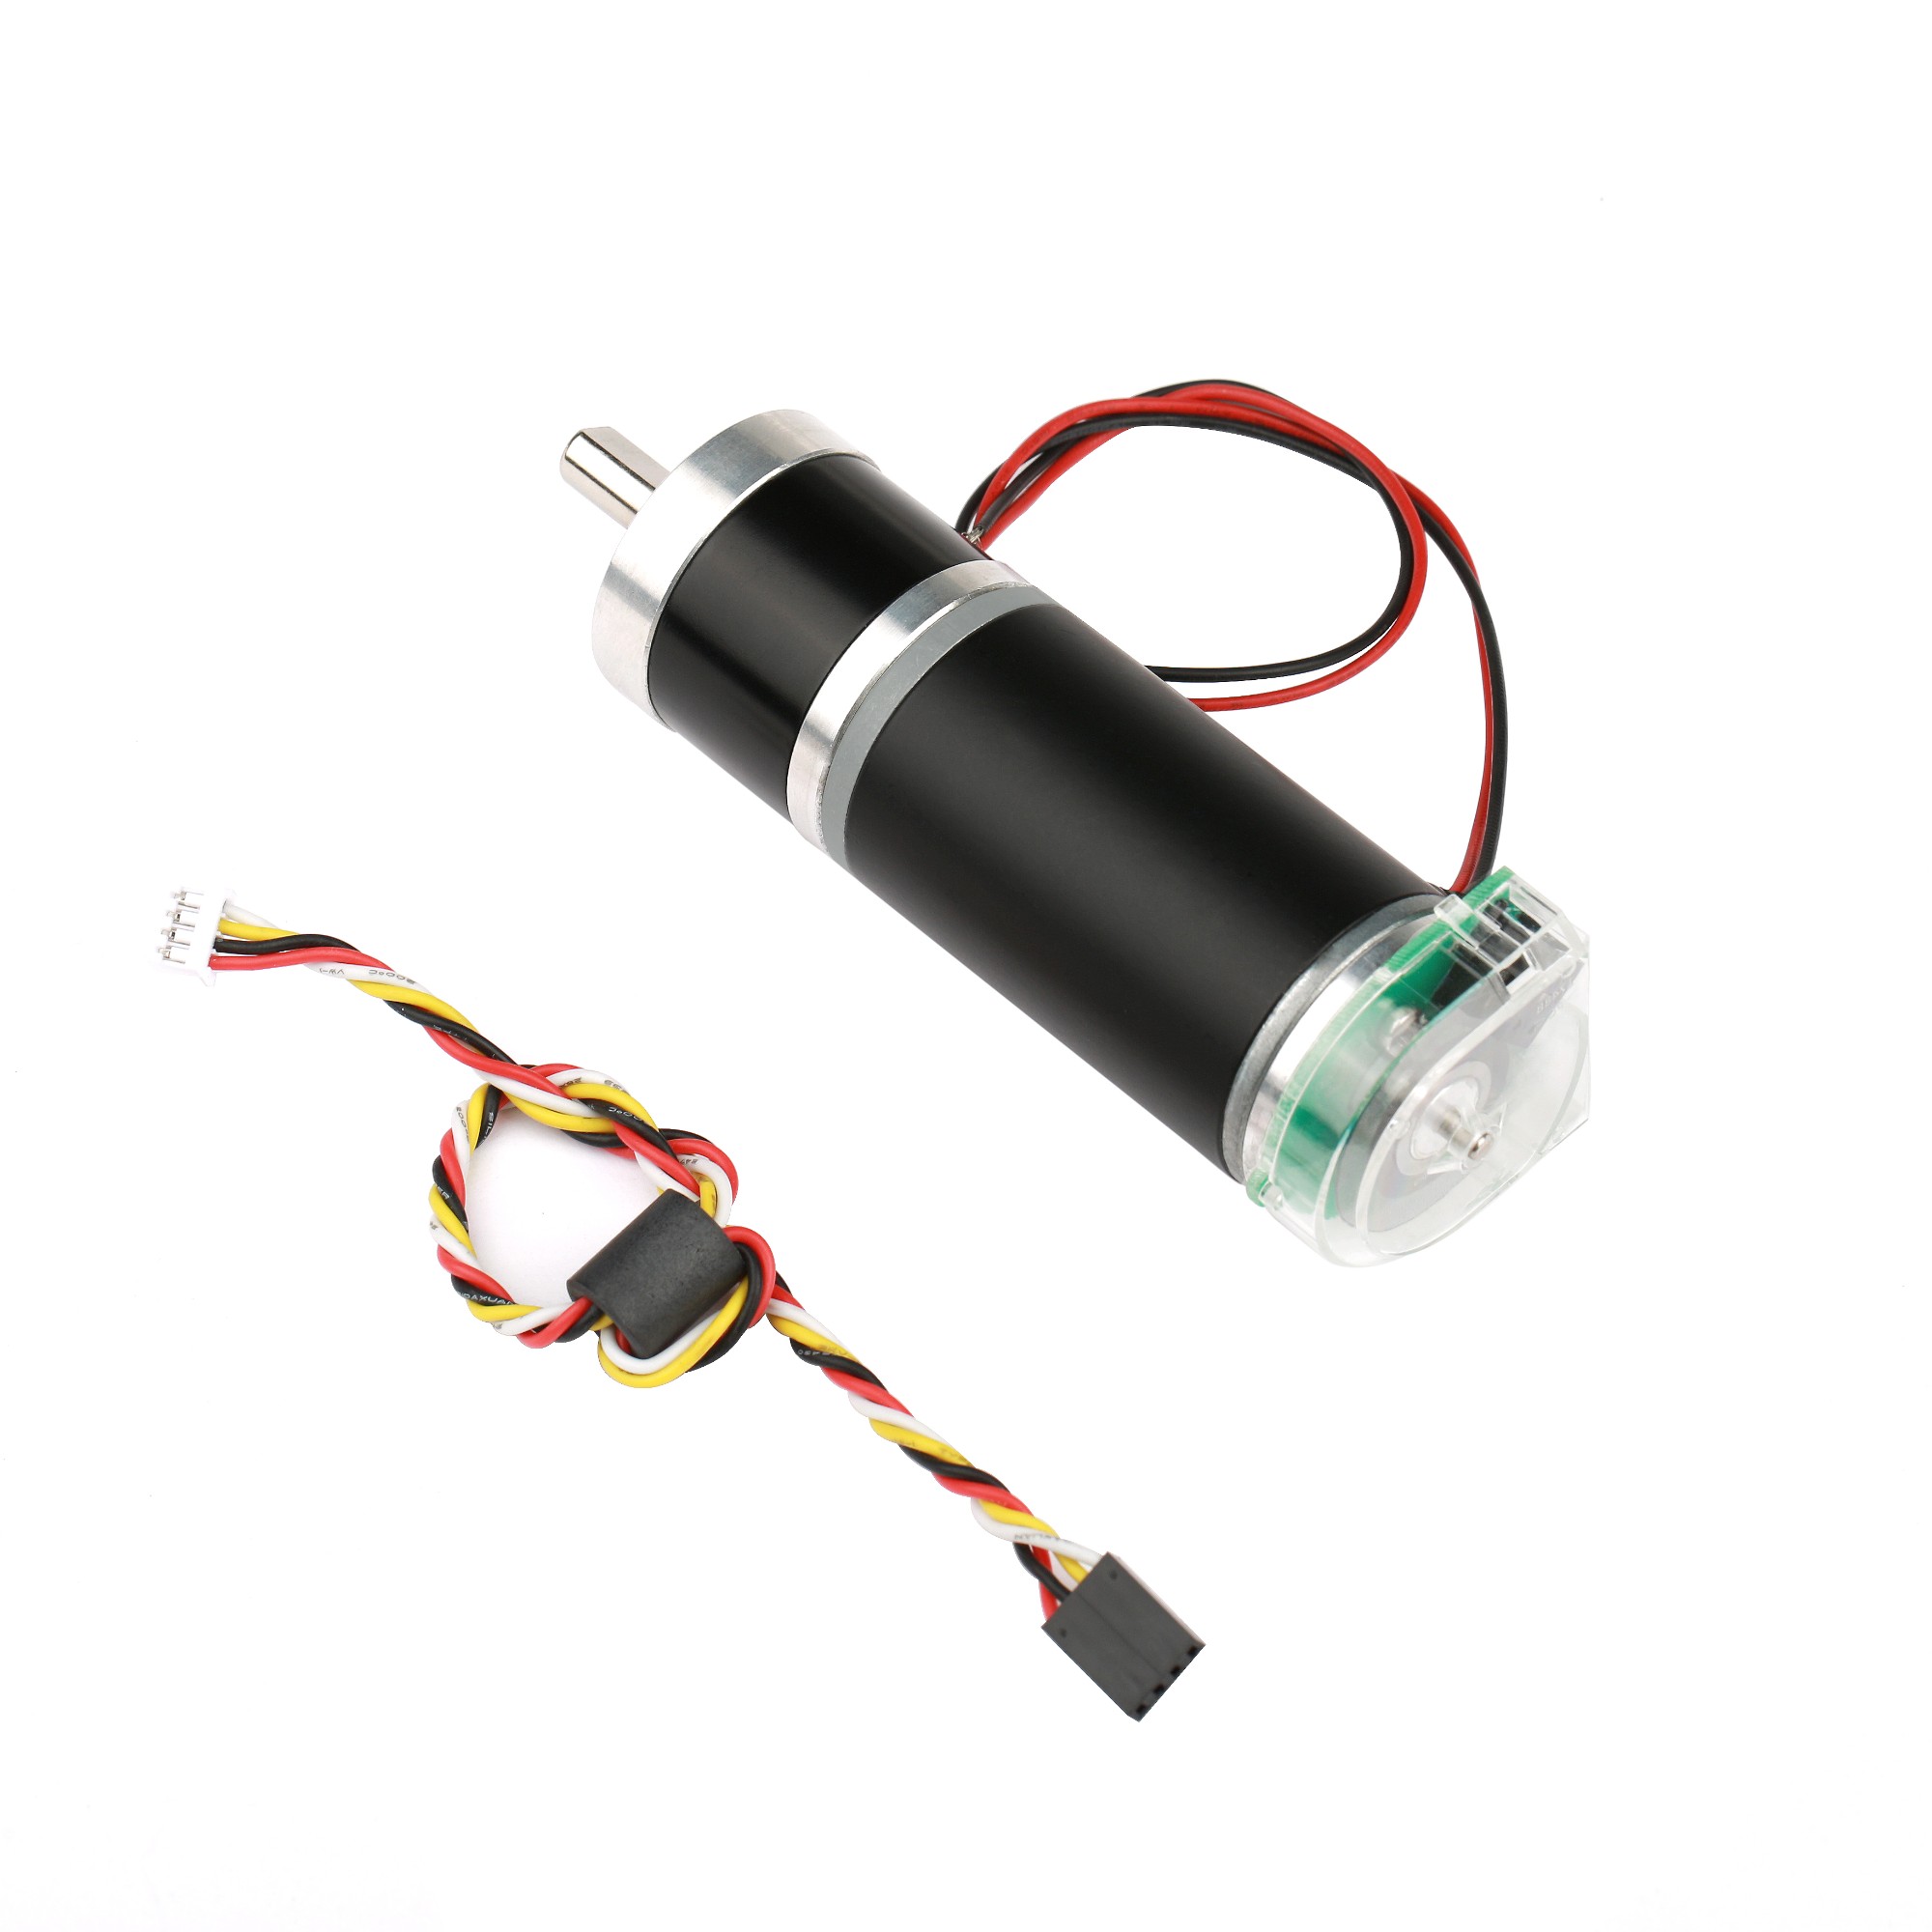  planetary gear dc brush motor D775 34W with simple structure and stable performance